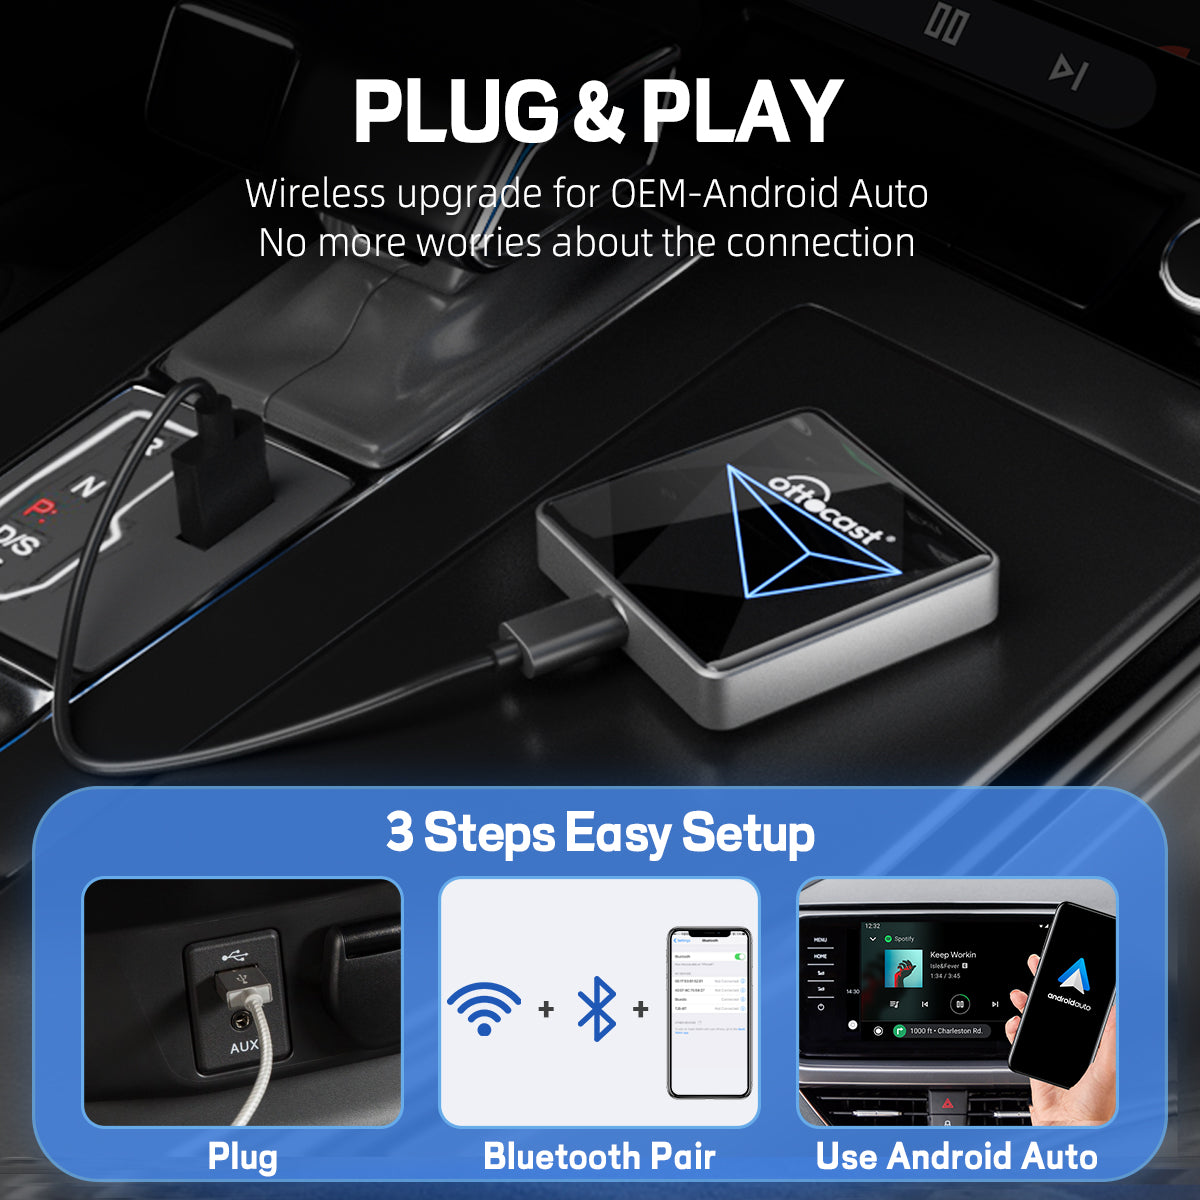 A2Air Pro Wireless Android Auto Adapter